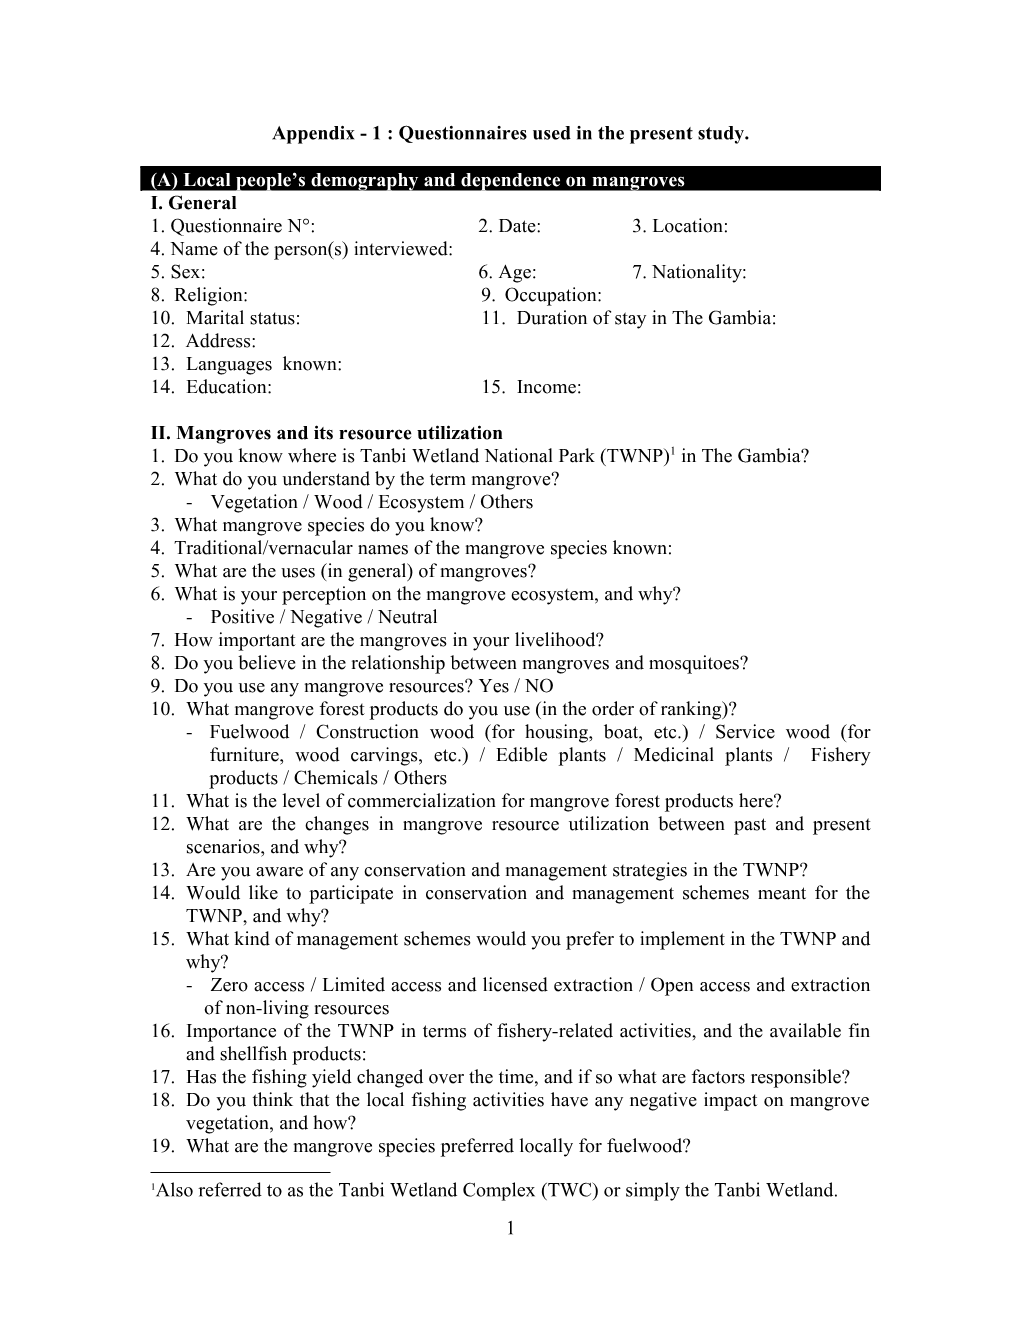 Appendix-1 : Questionnaires Used in the Present Study